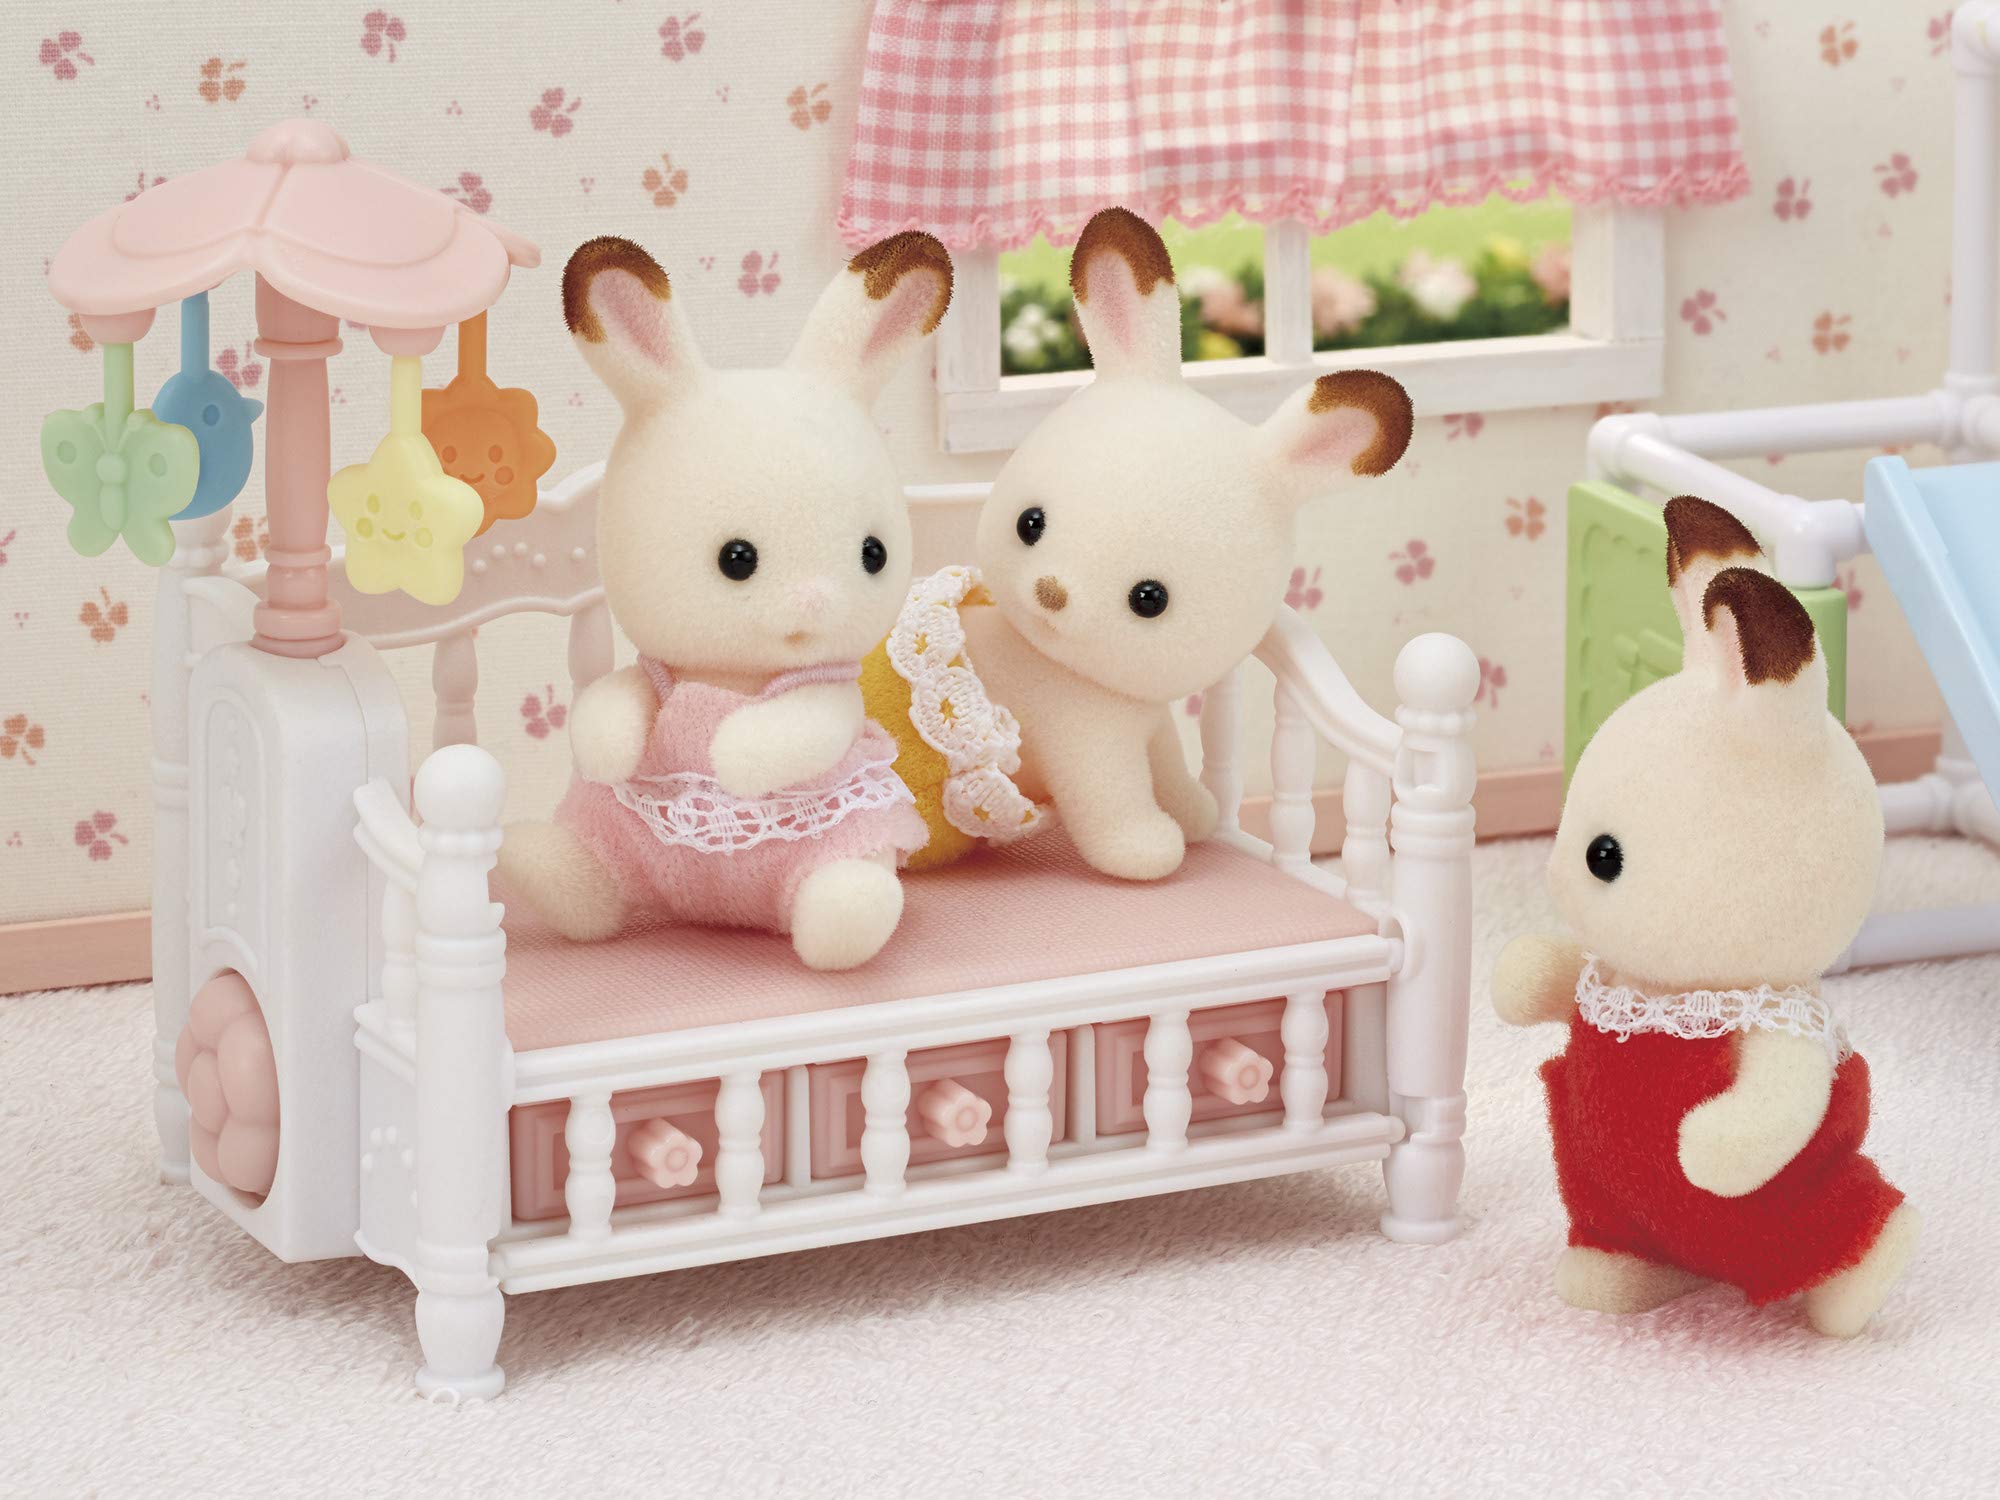 Calico Critters Crib with Mobile, Dollhouse Furniture Set with Working Features